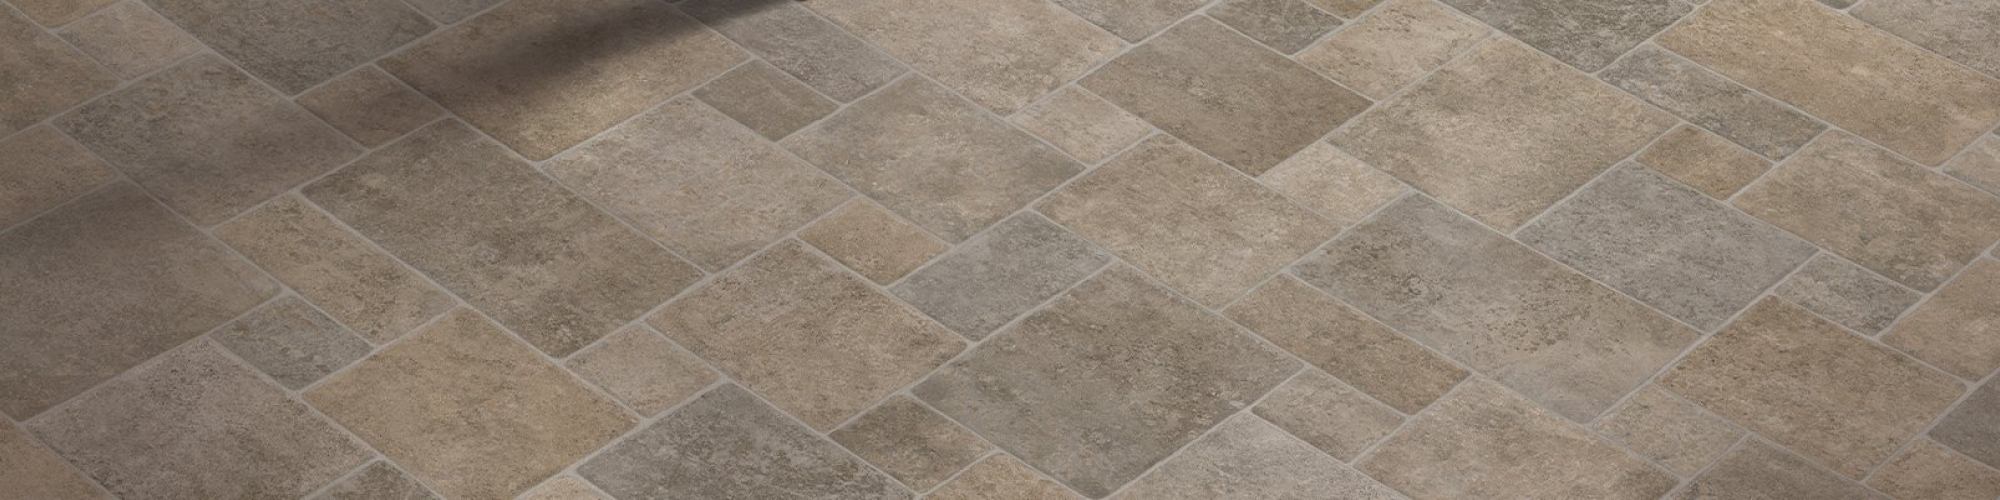 Find out more about luxury vinyl flooring  with Jason's Carpet and Tile